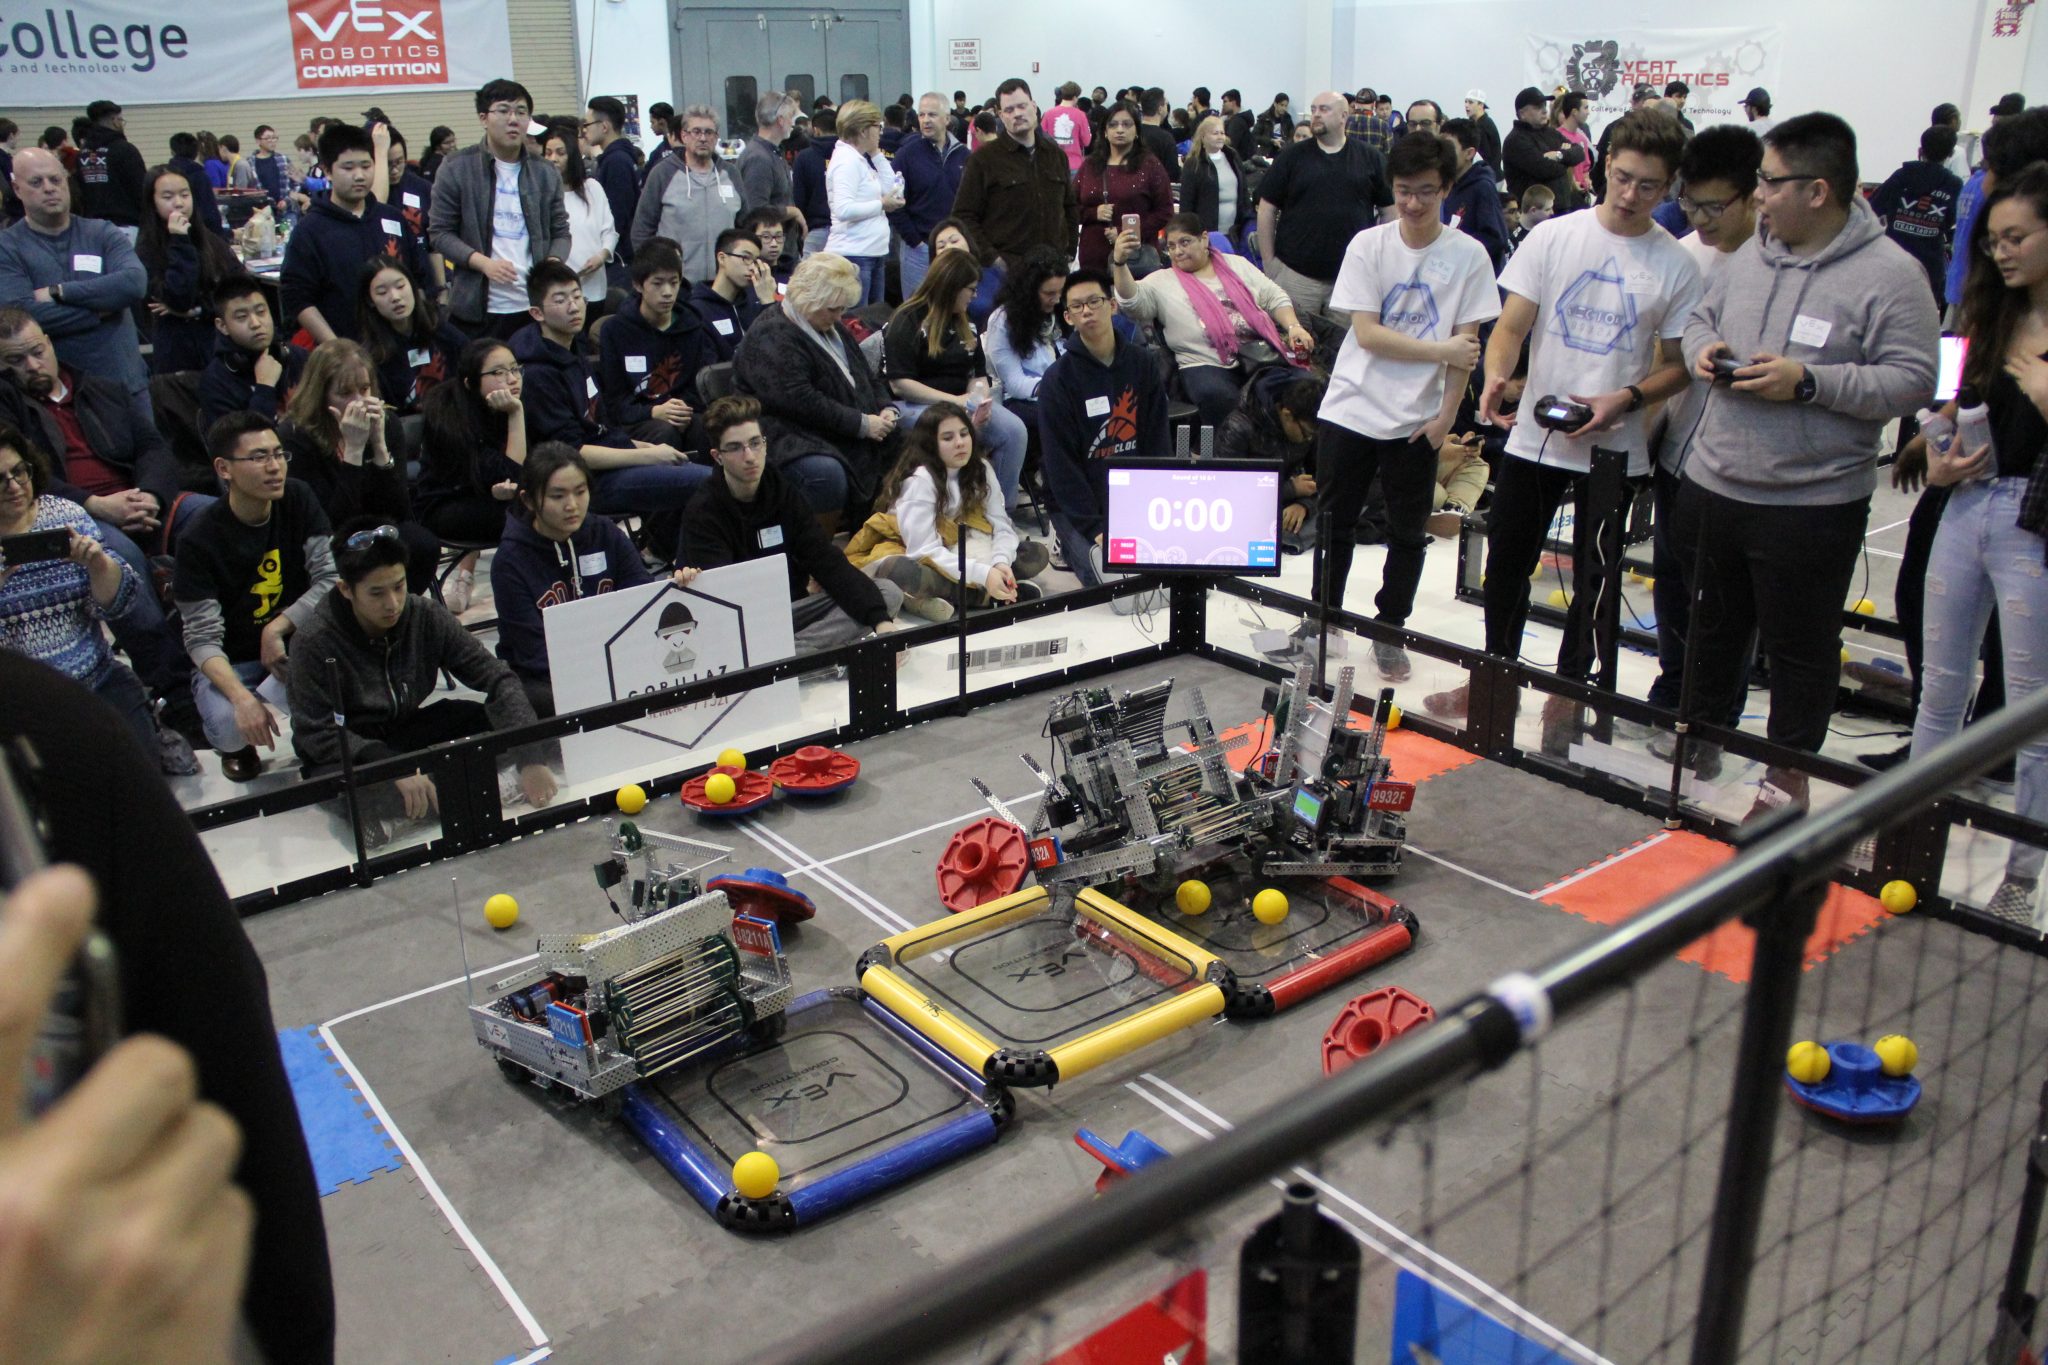 Vaughn Robotics Team Host Competitions for College and High School Teams